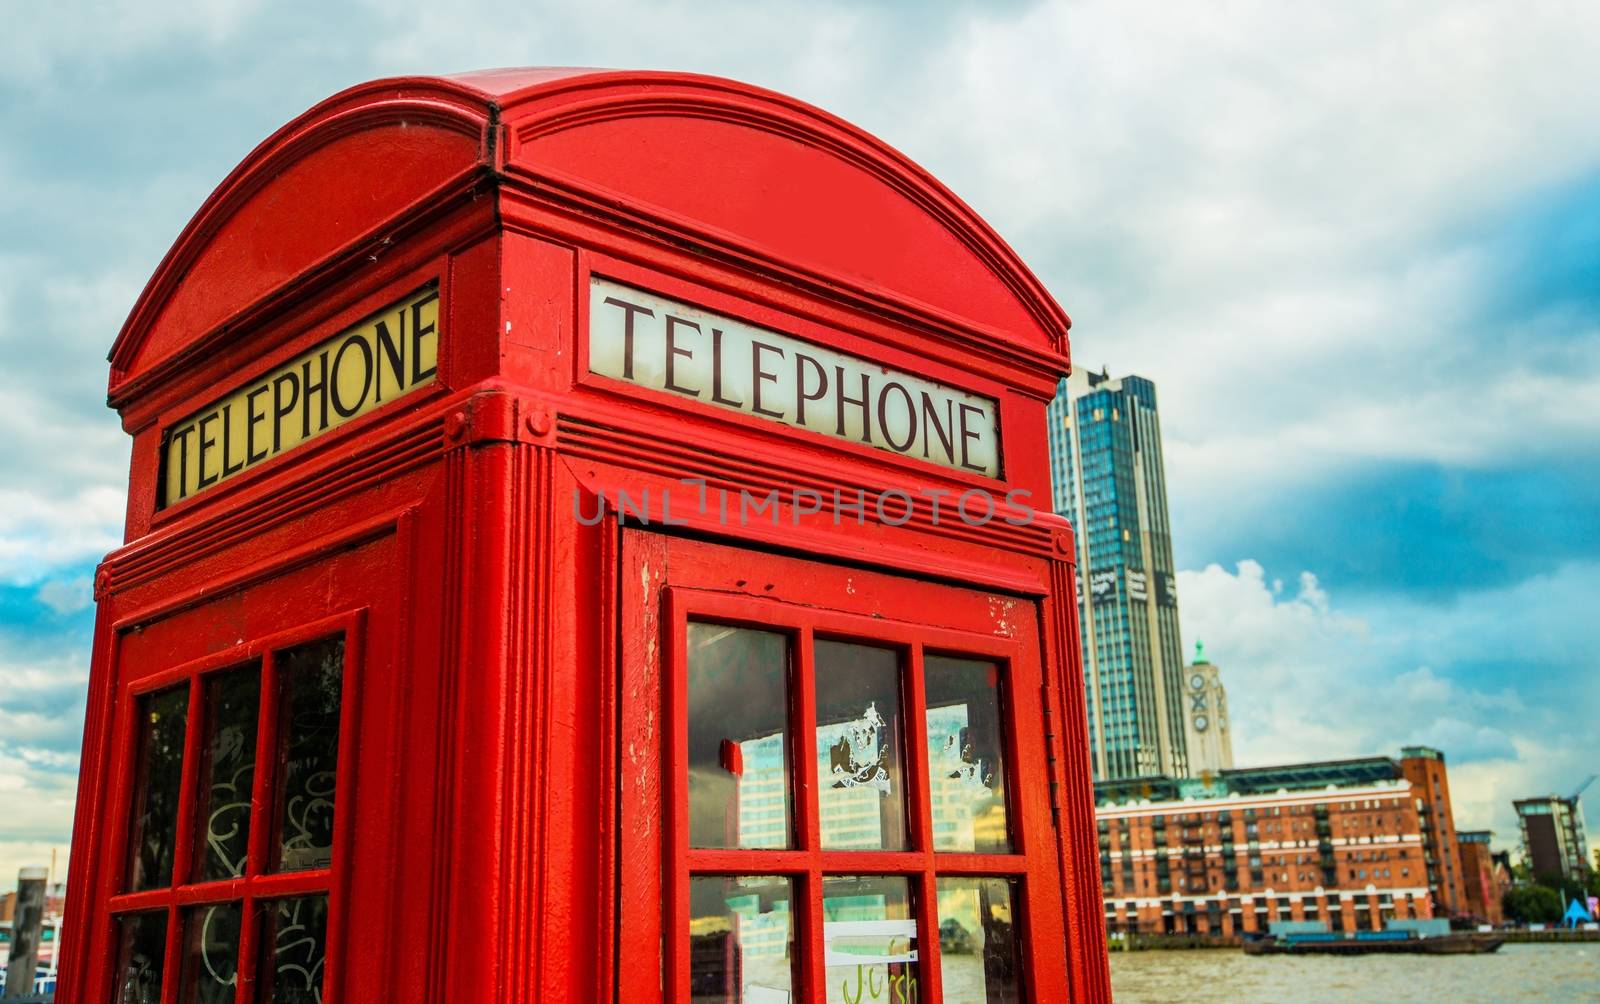 London Red Telephone Box by welcomia